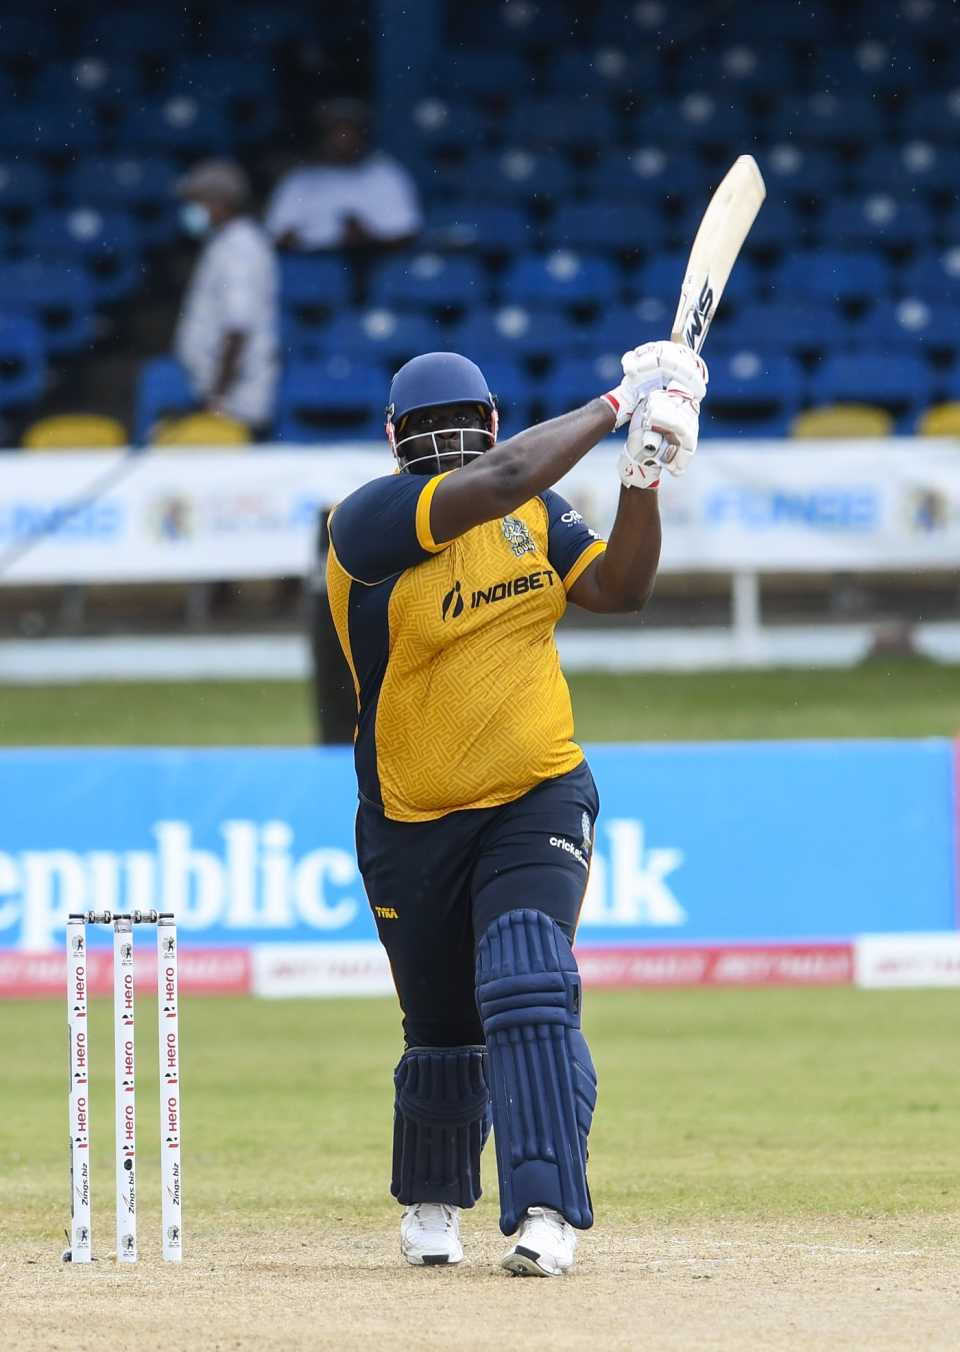 Rahkeem Cornwall smashes one over long-off, St Kitts and Nevis Patriots v St Lucia Zouks, Port-of-Spain, August 27, 2020